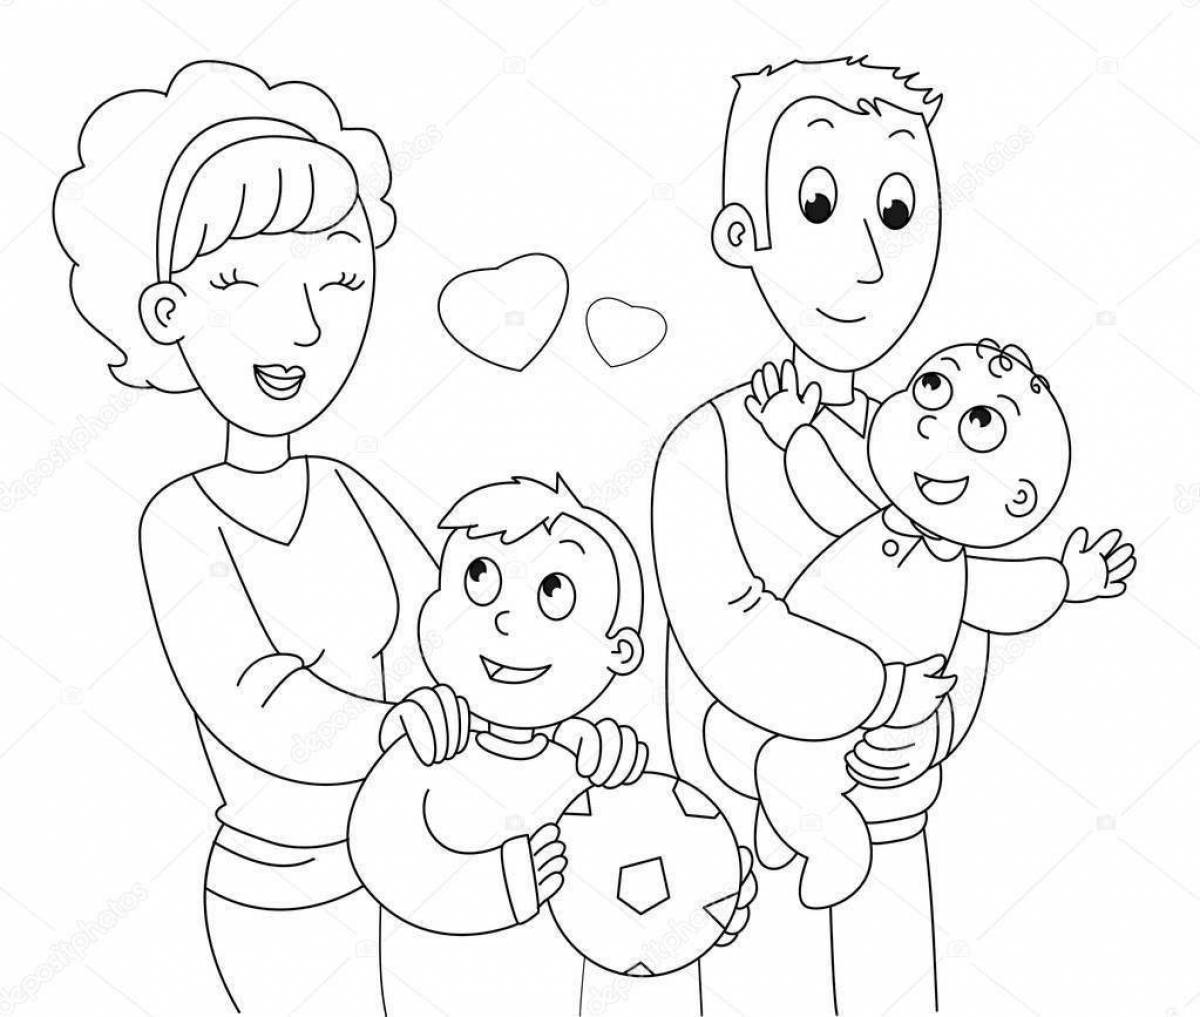 Exquisite mom and dad coloring book for kids